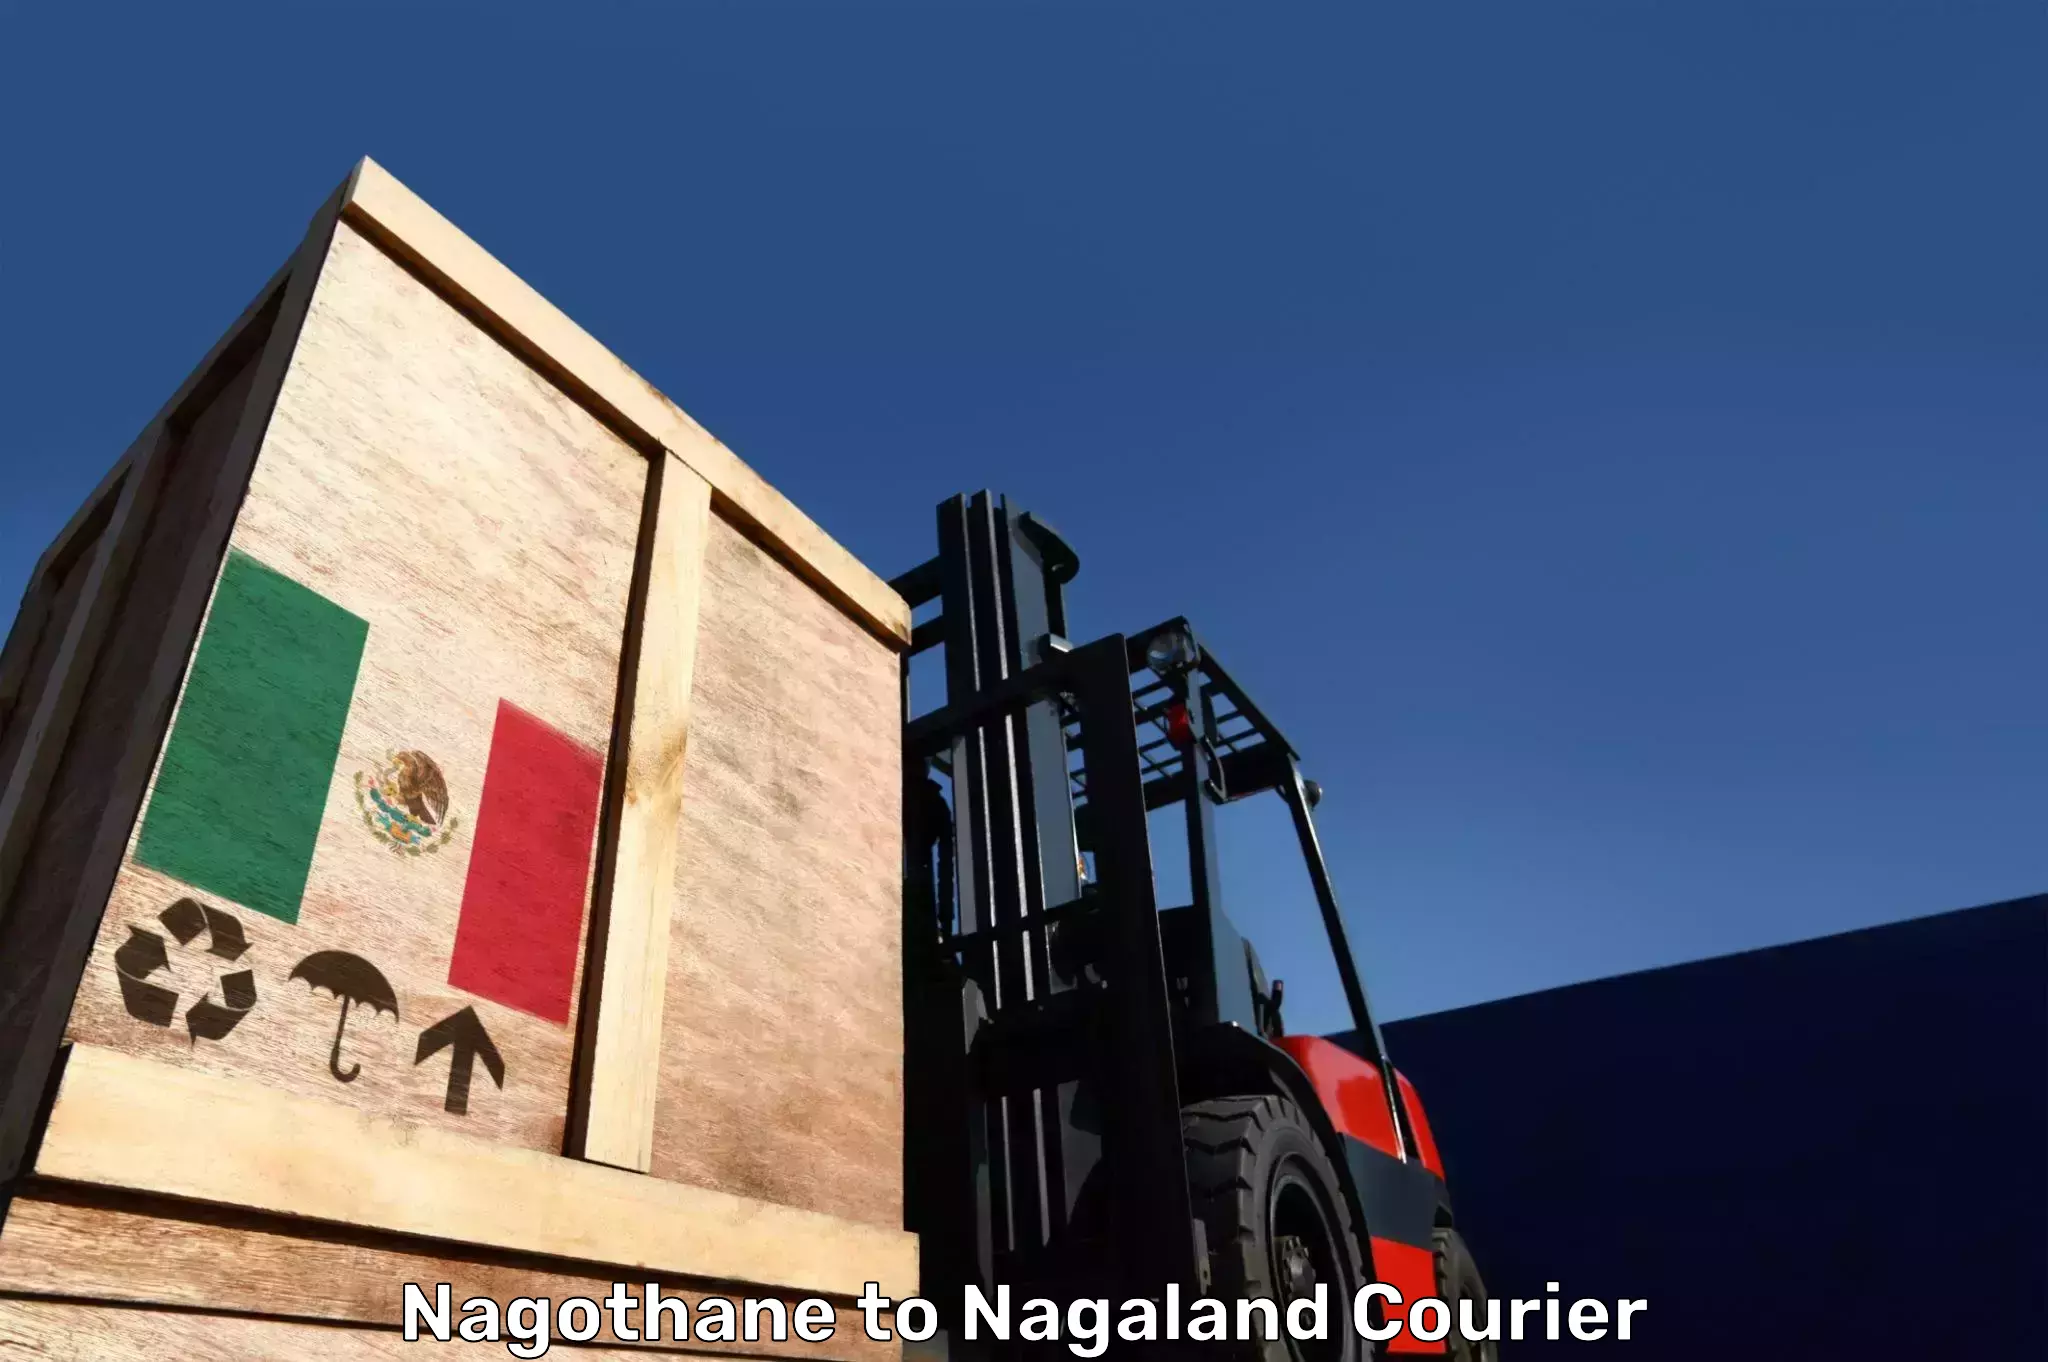 Baggage transport network in Nagothane to Nagaland